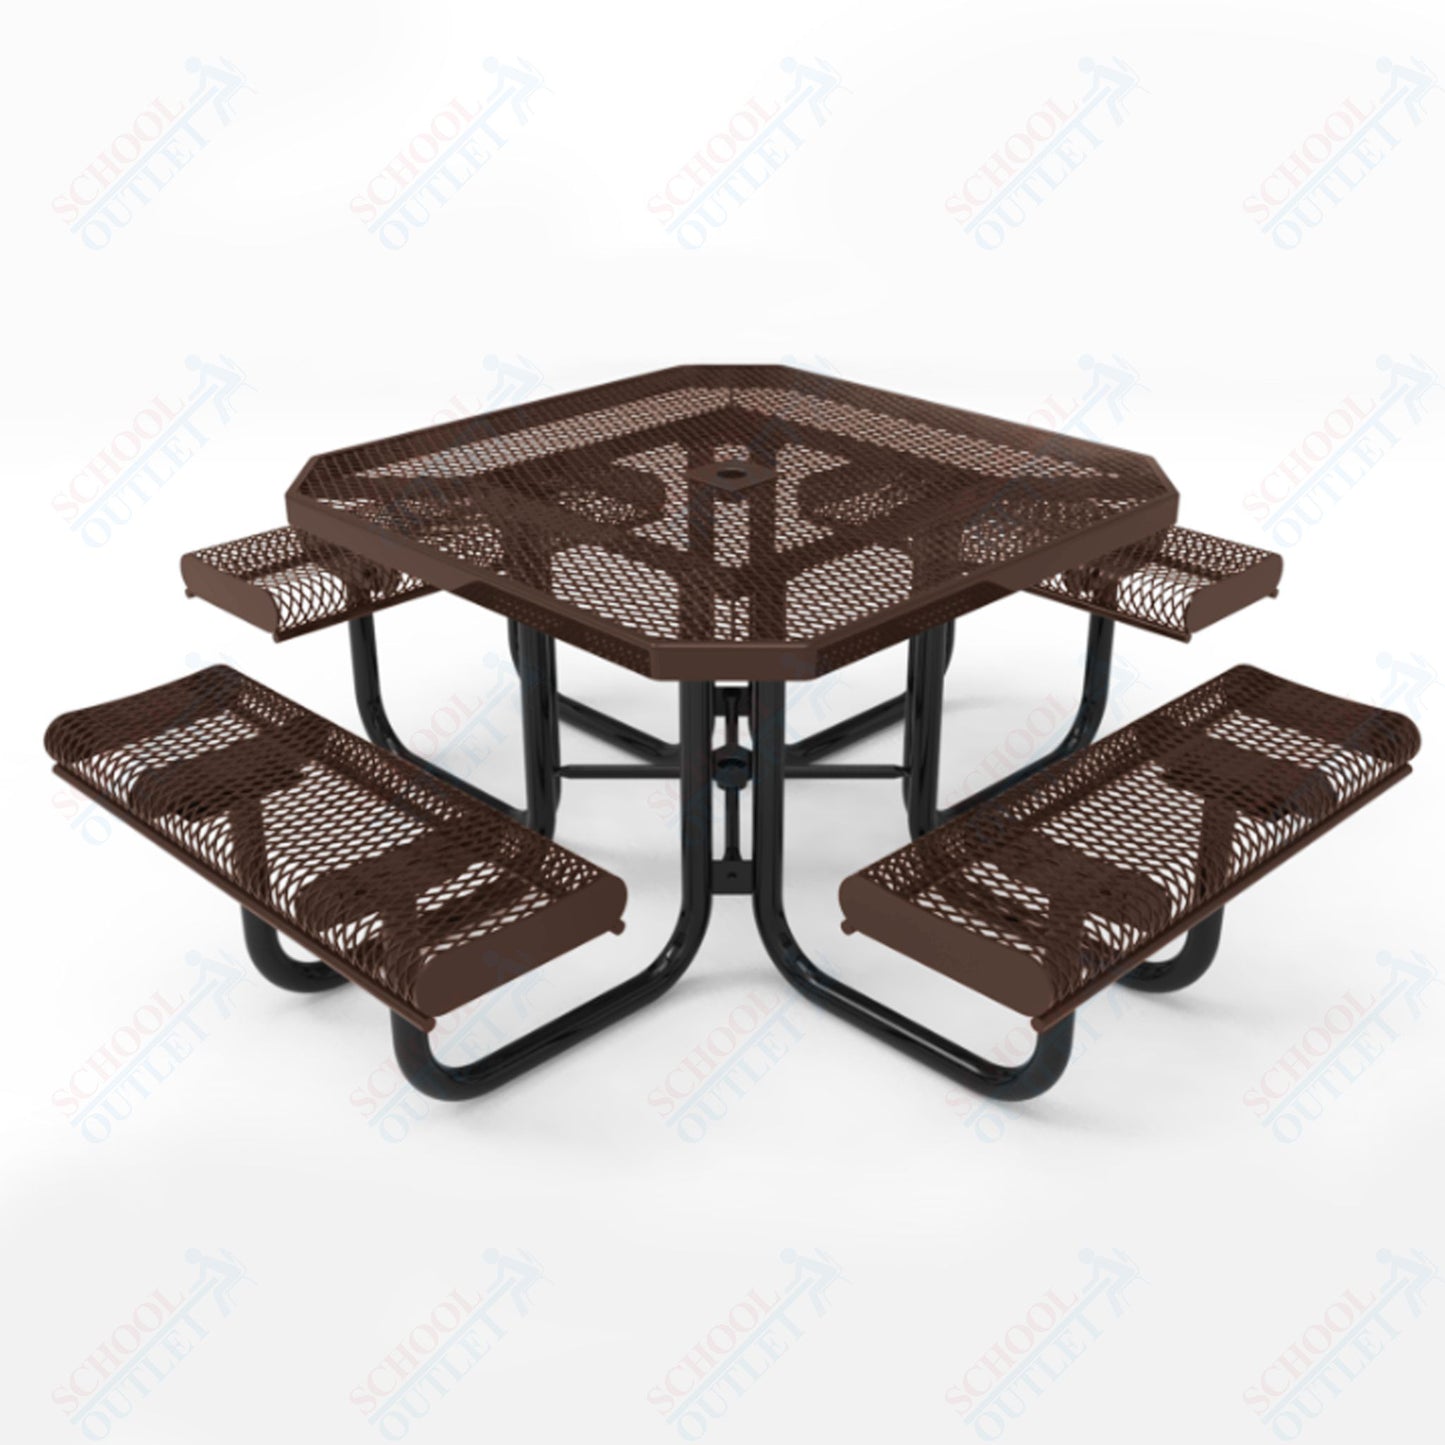 MyTcoat MYT-TOR46 46″ Octagon Portable Picnic Table with Rolled Edges (80.51"W x 80.51"D x 30"H)